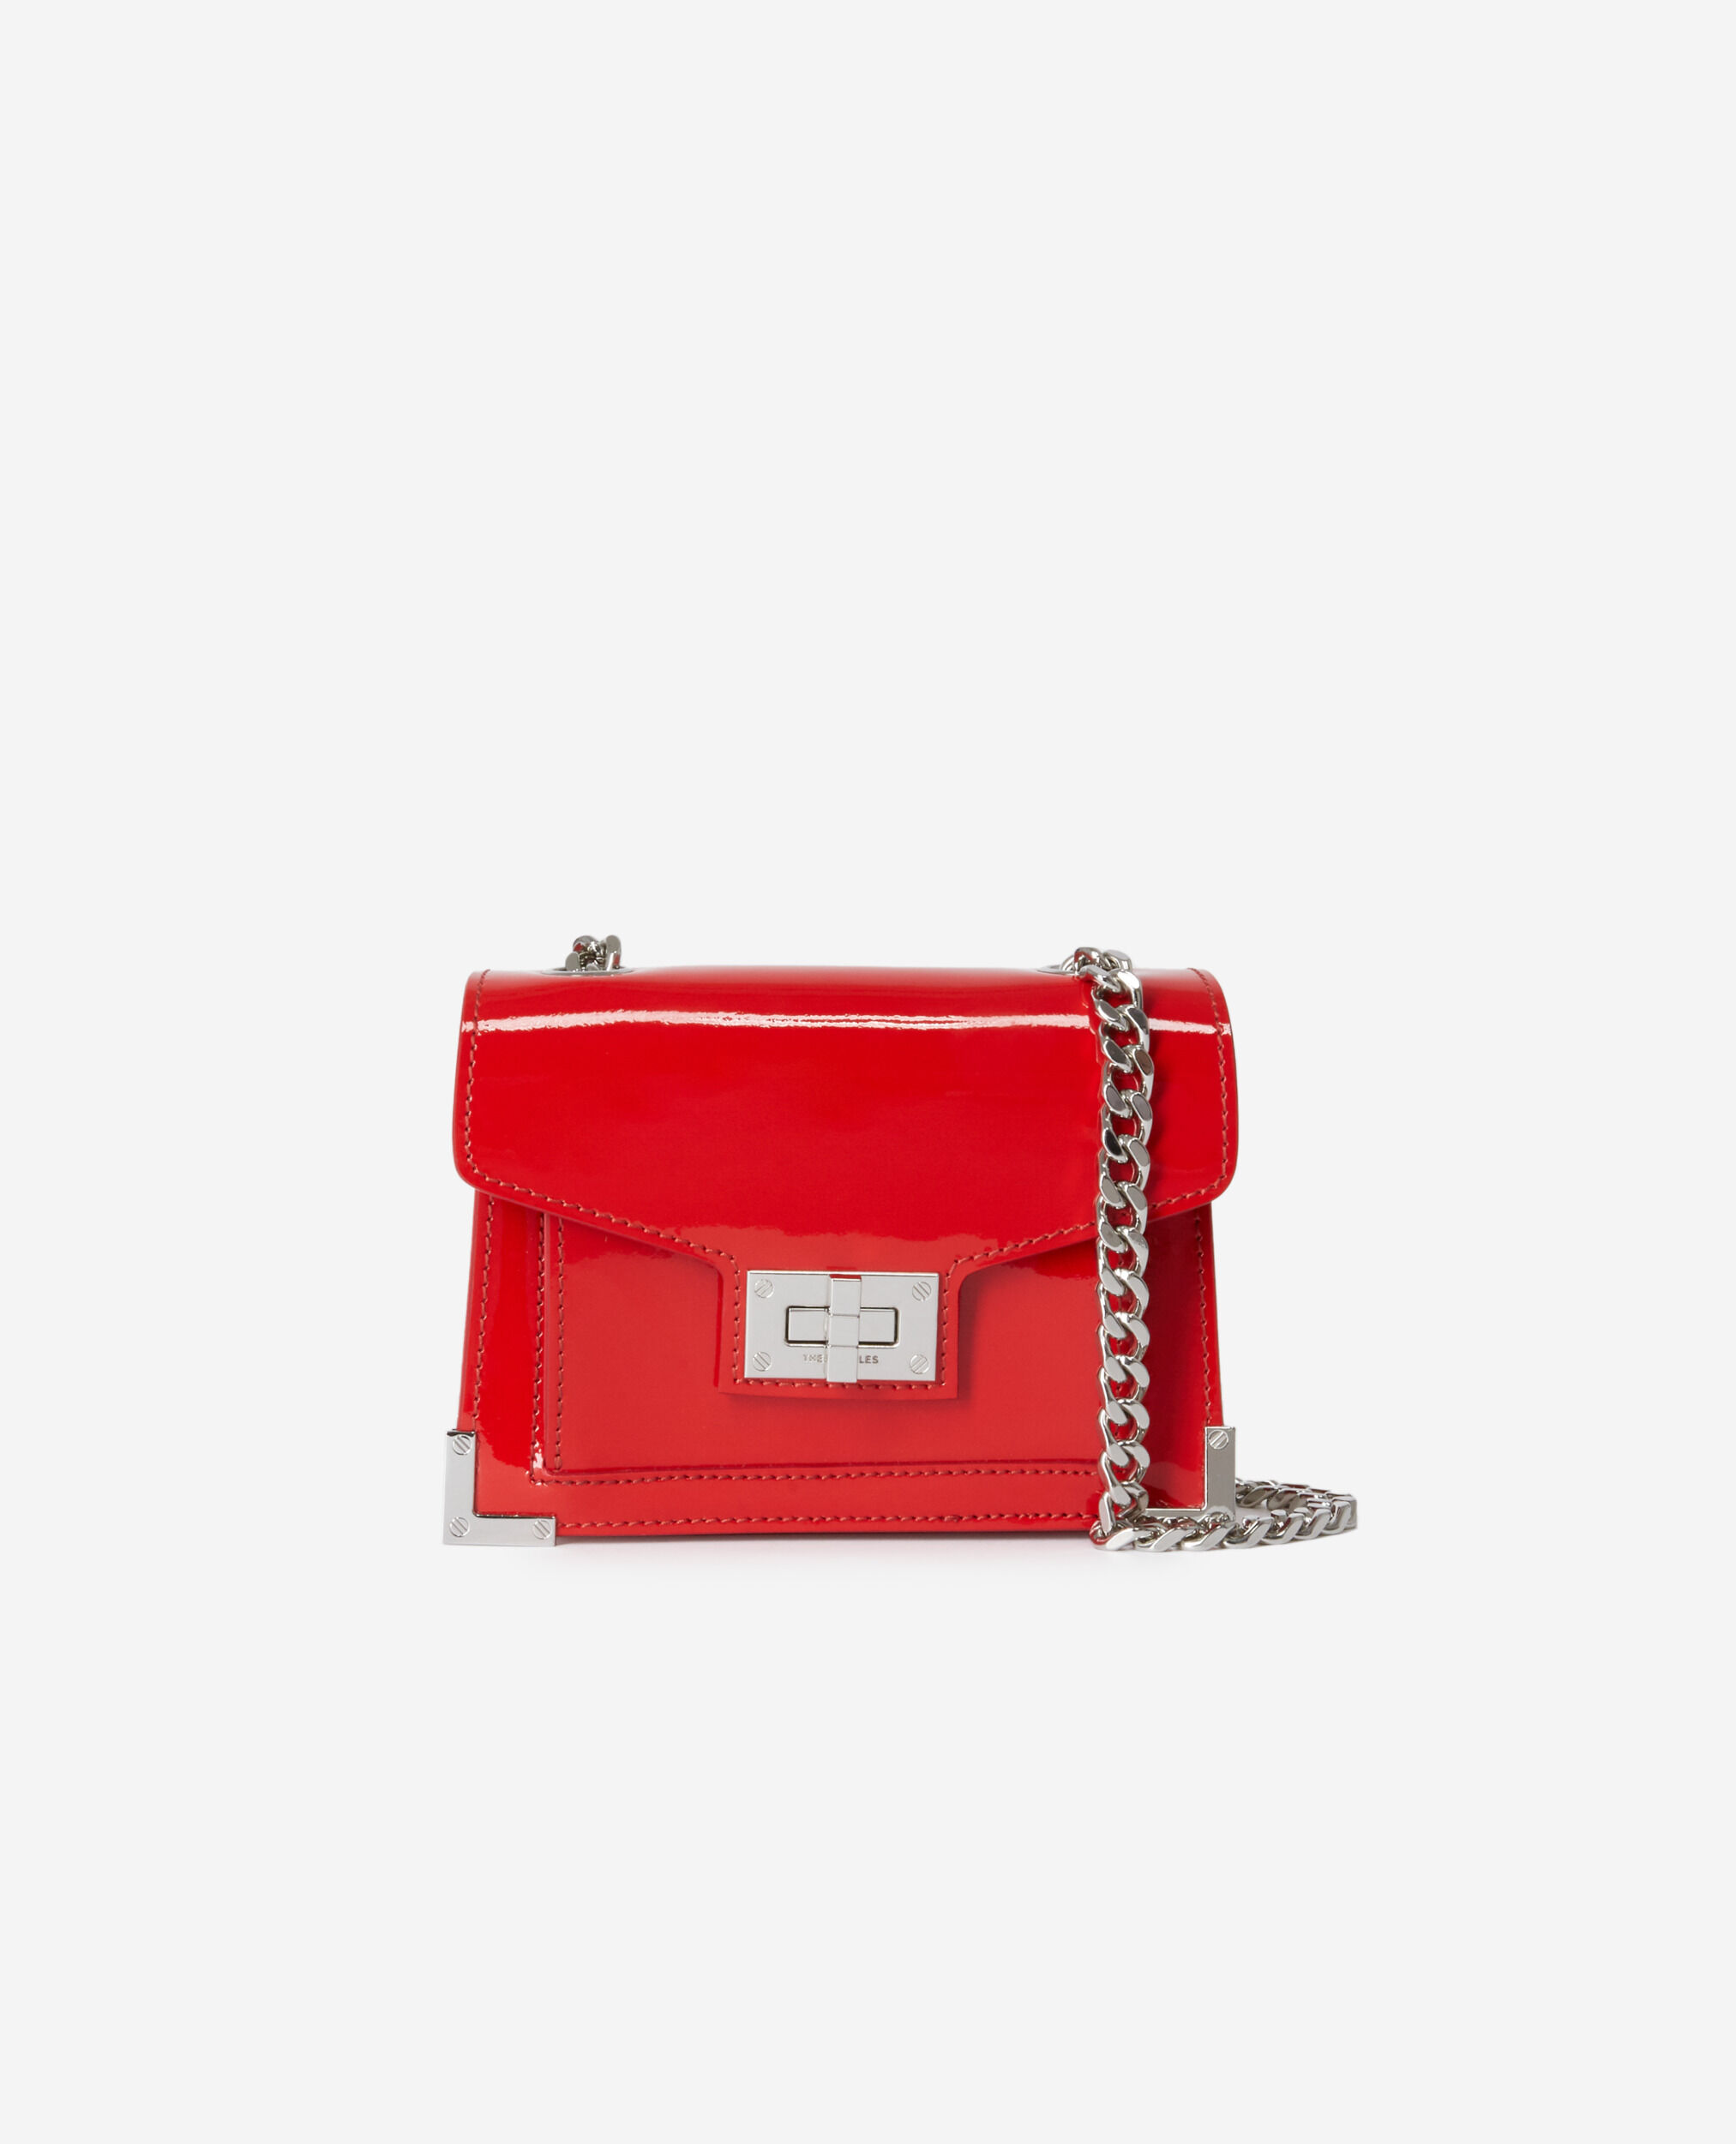 Nano Emily bag in red leather, RED, hi-res image number null